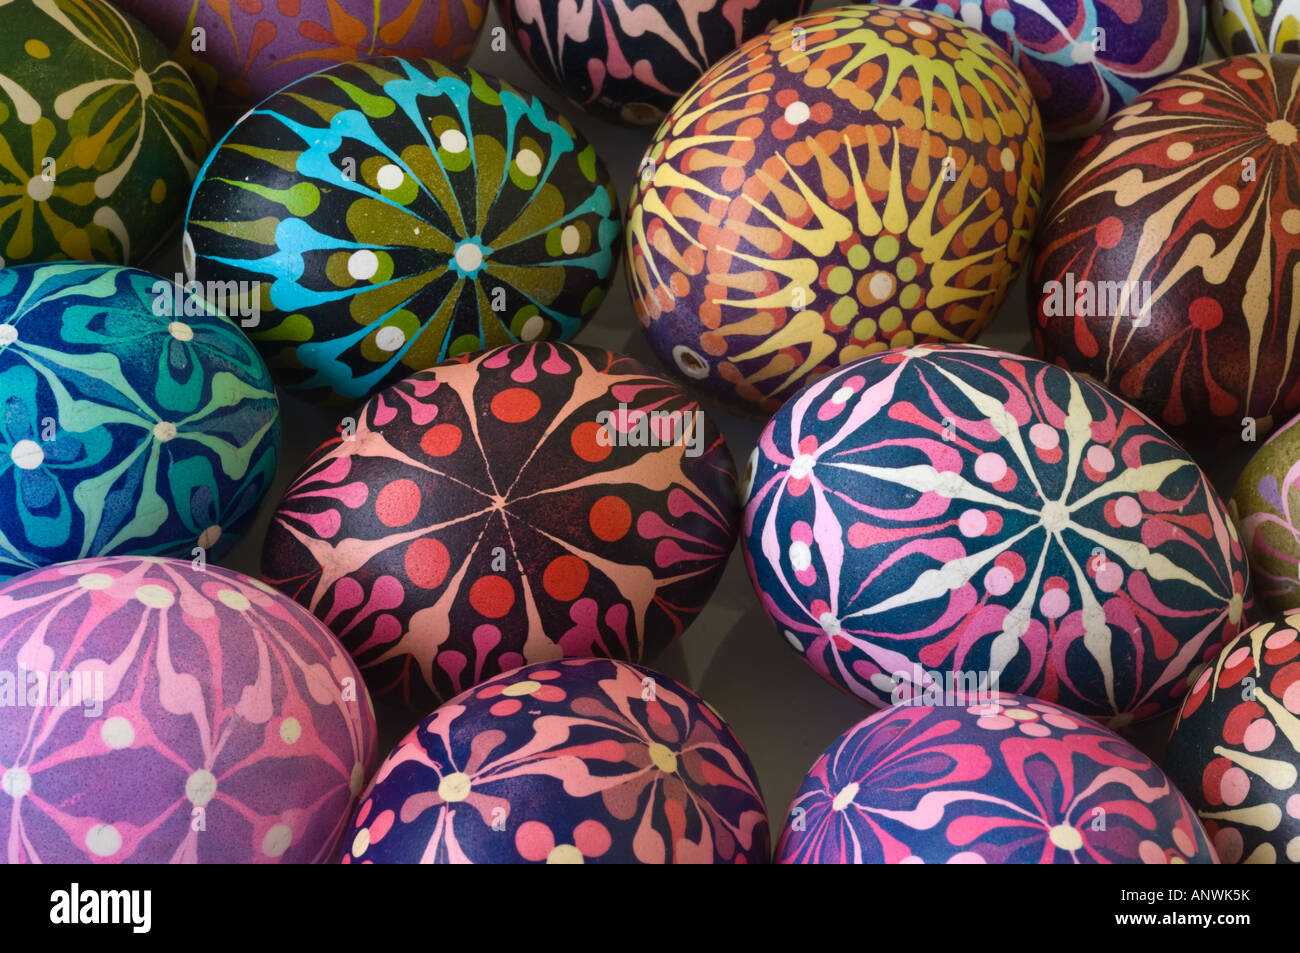 Decorated Easter Eggs, collection, batic method, Krystyna Majewska, Gdansk, Poland Stock Photo